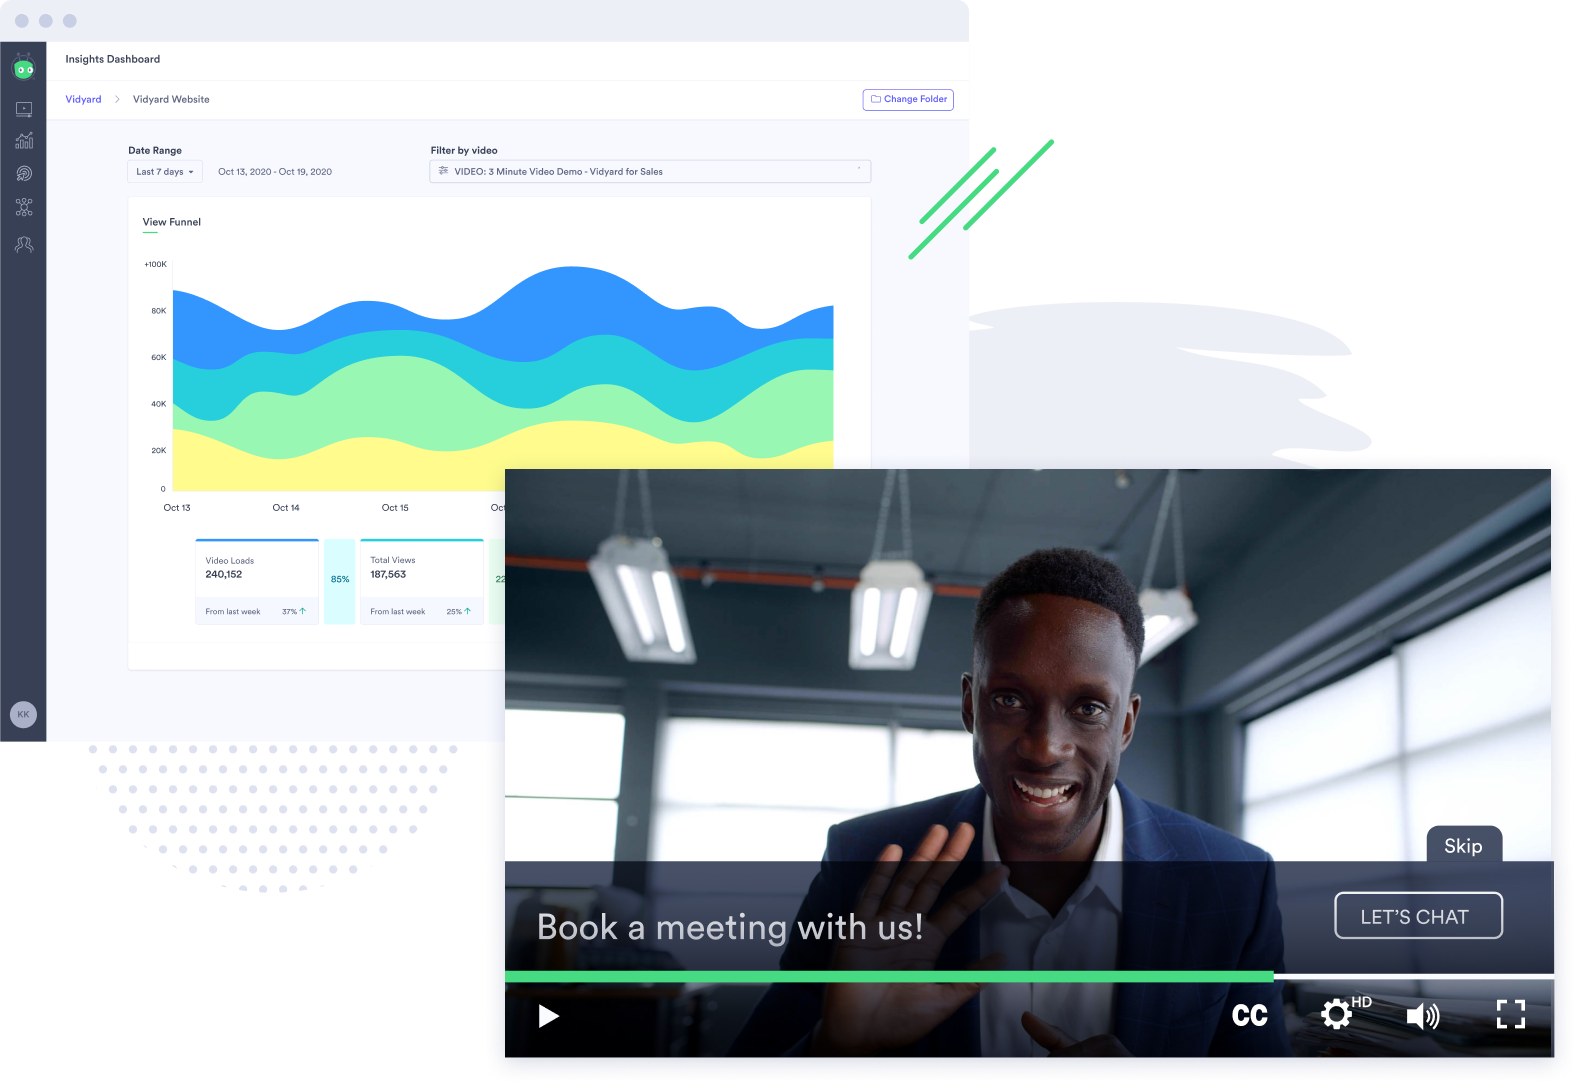 Insights Dashboard and Video